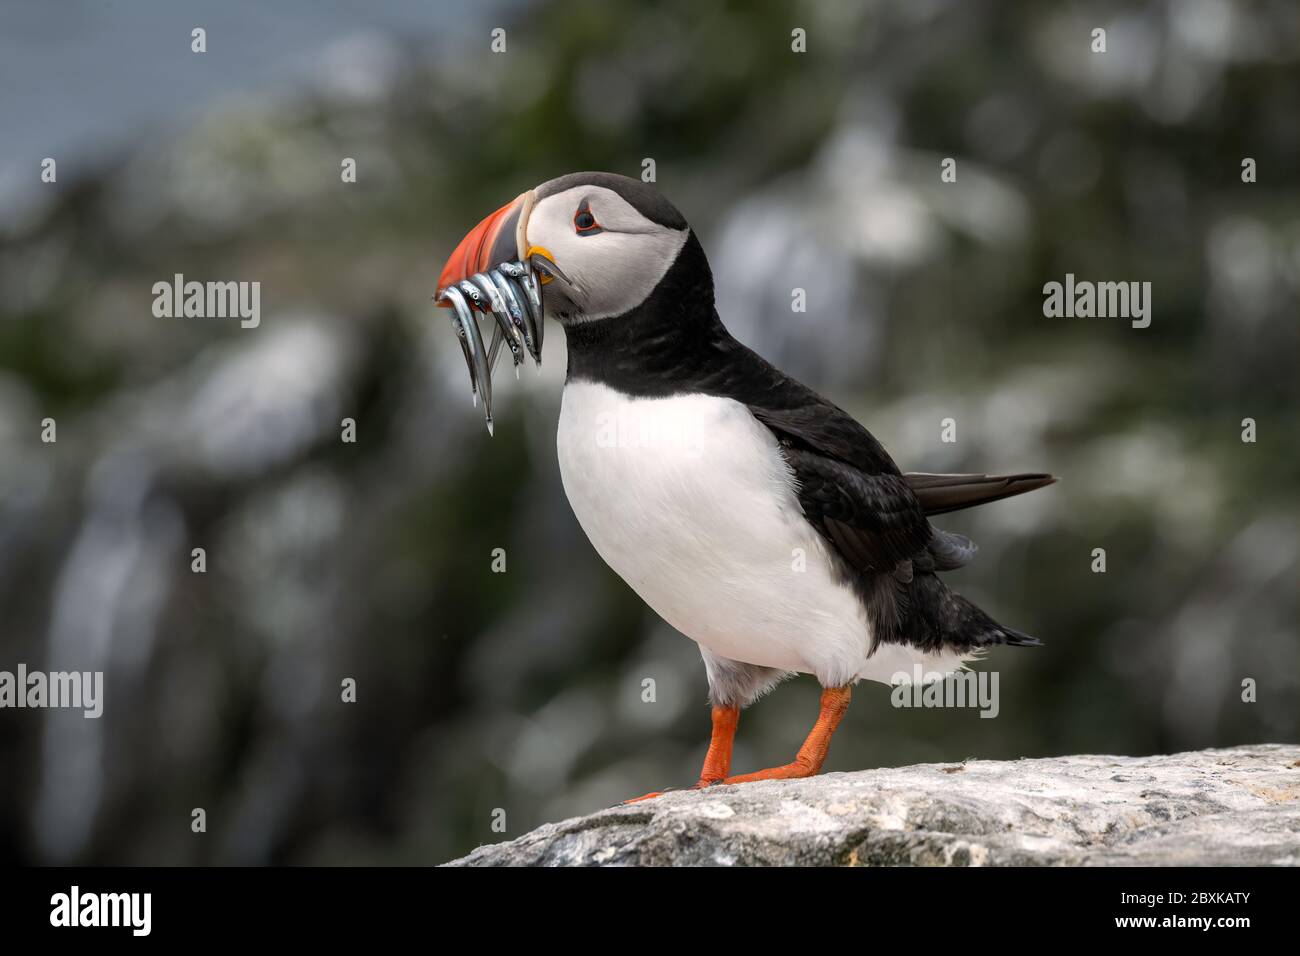 Puffin standing on a rock with sand eels in its mouth. The breeding colony can be seen in the background. Stock Photo